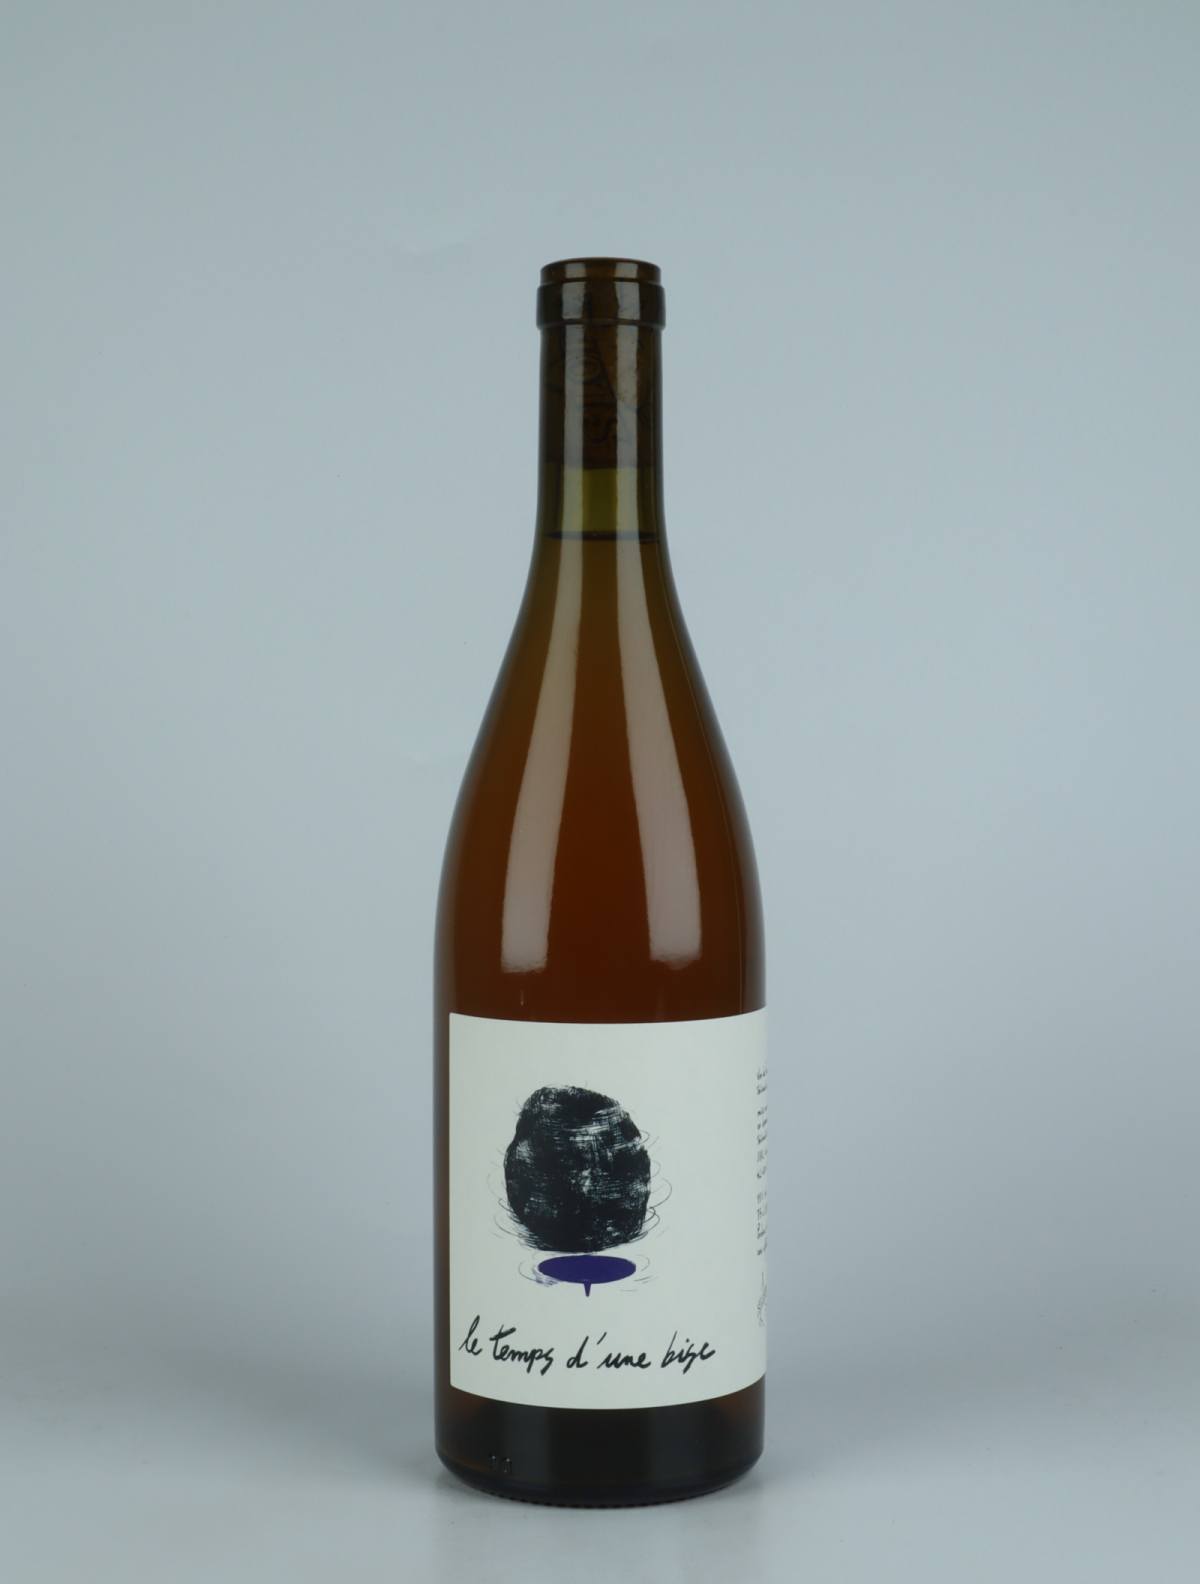 A bottle 2022 Le Temps d'une Bise White wine from Slope, Rhône in France